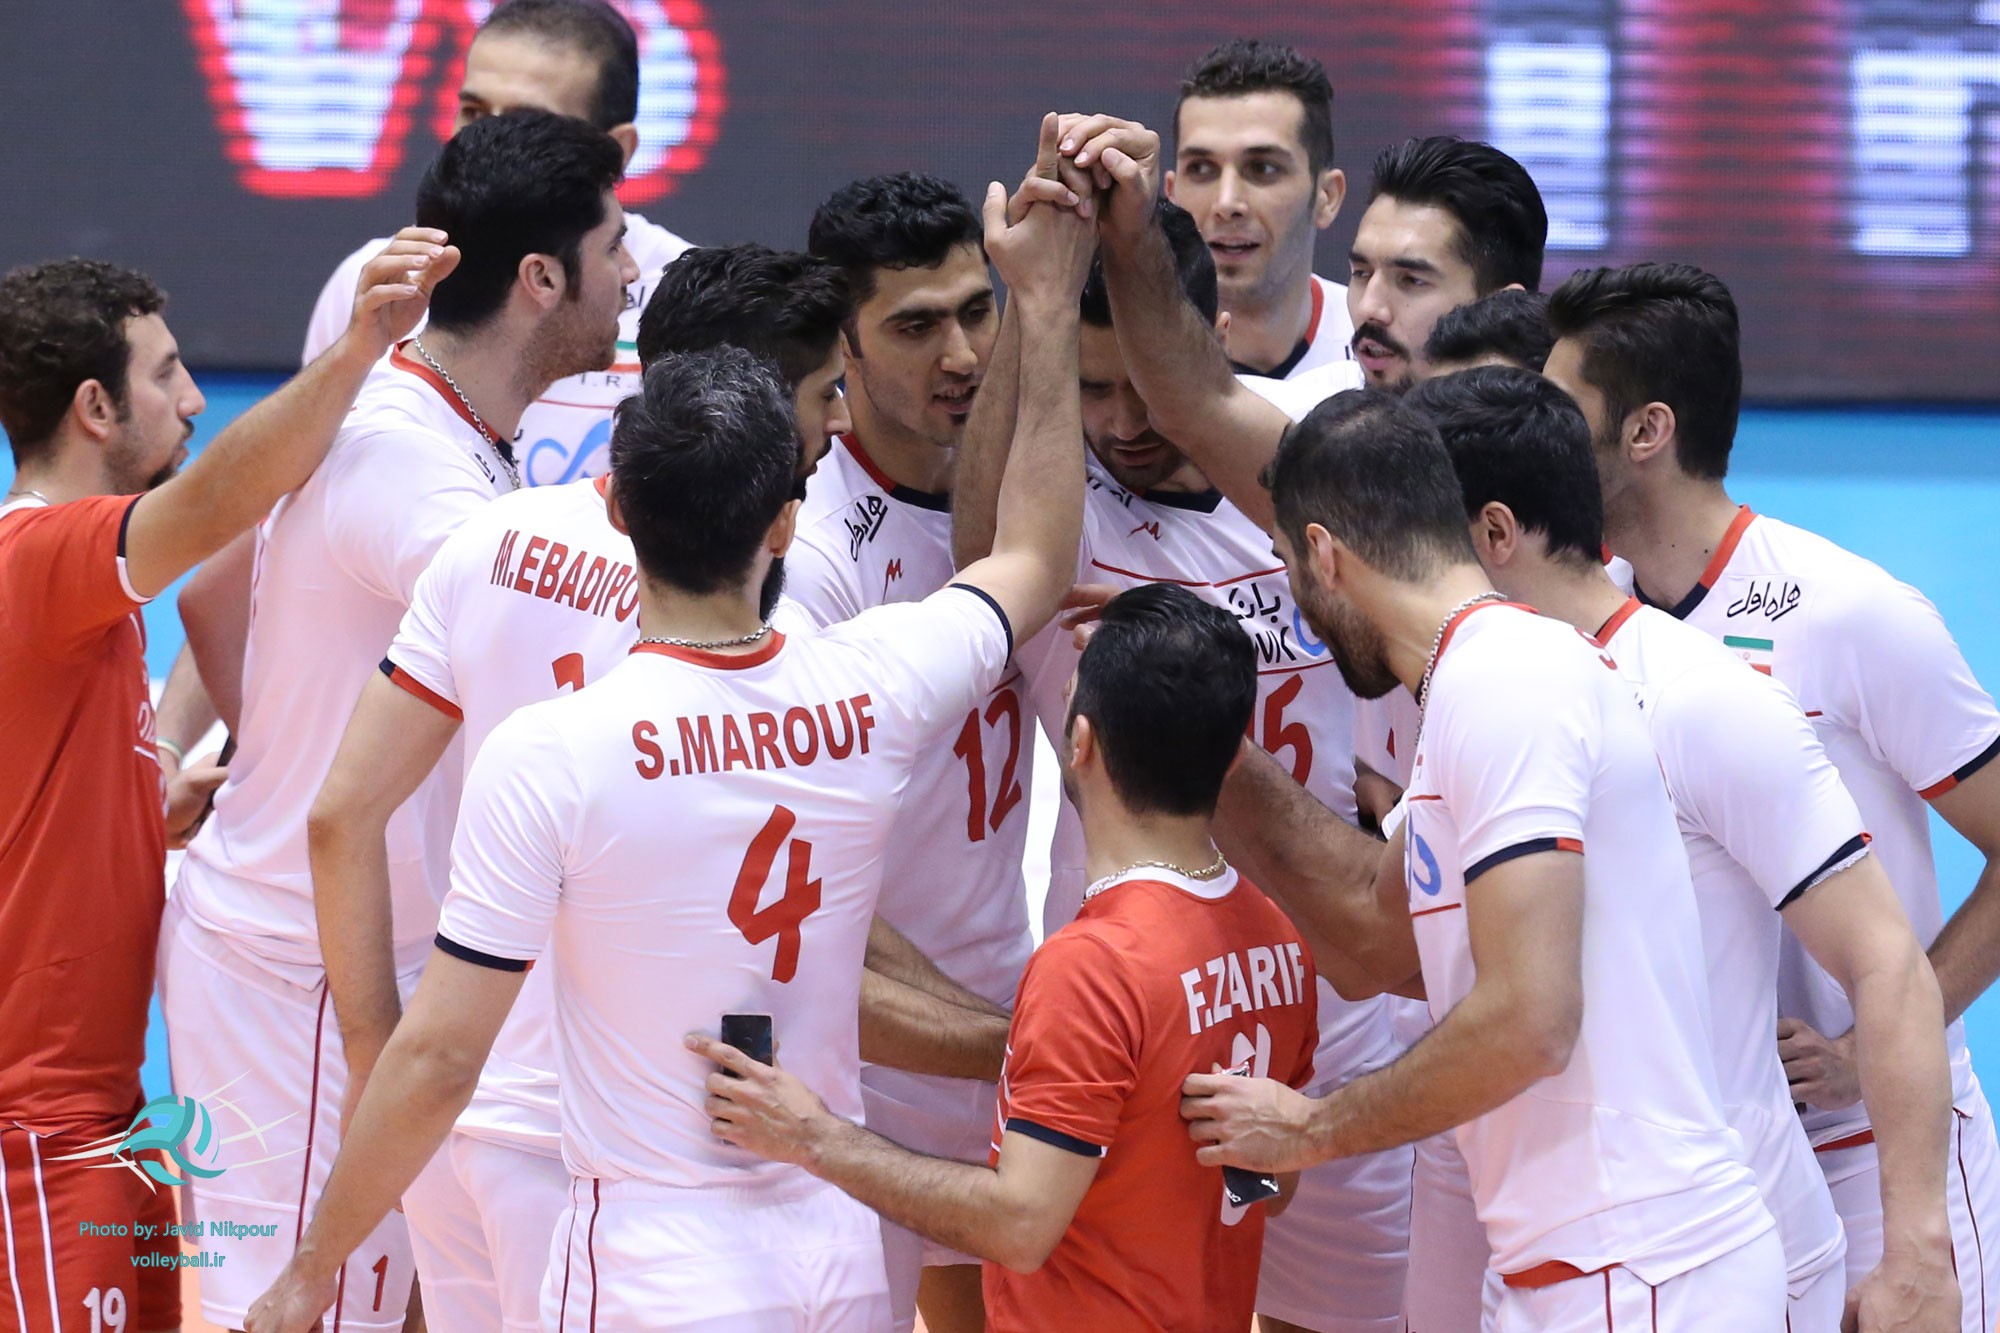 Iran volleyball team among top 8 in Rio Olympic games